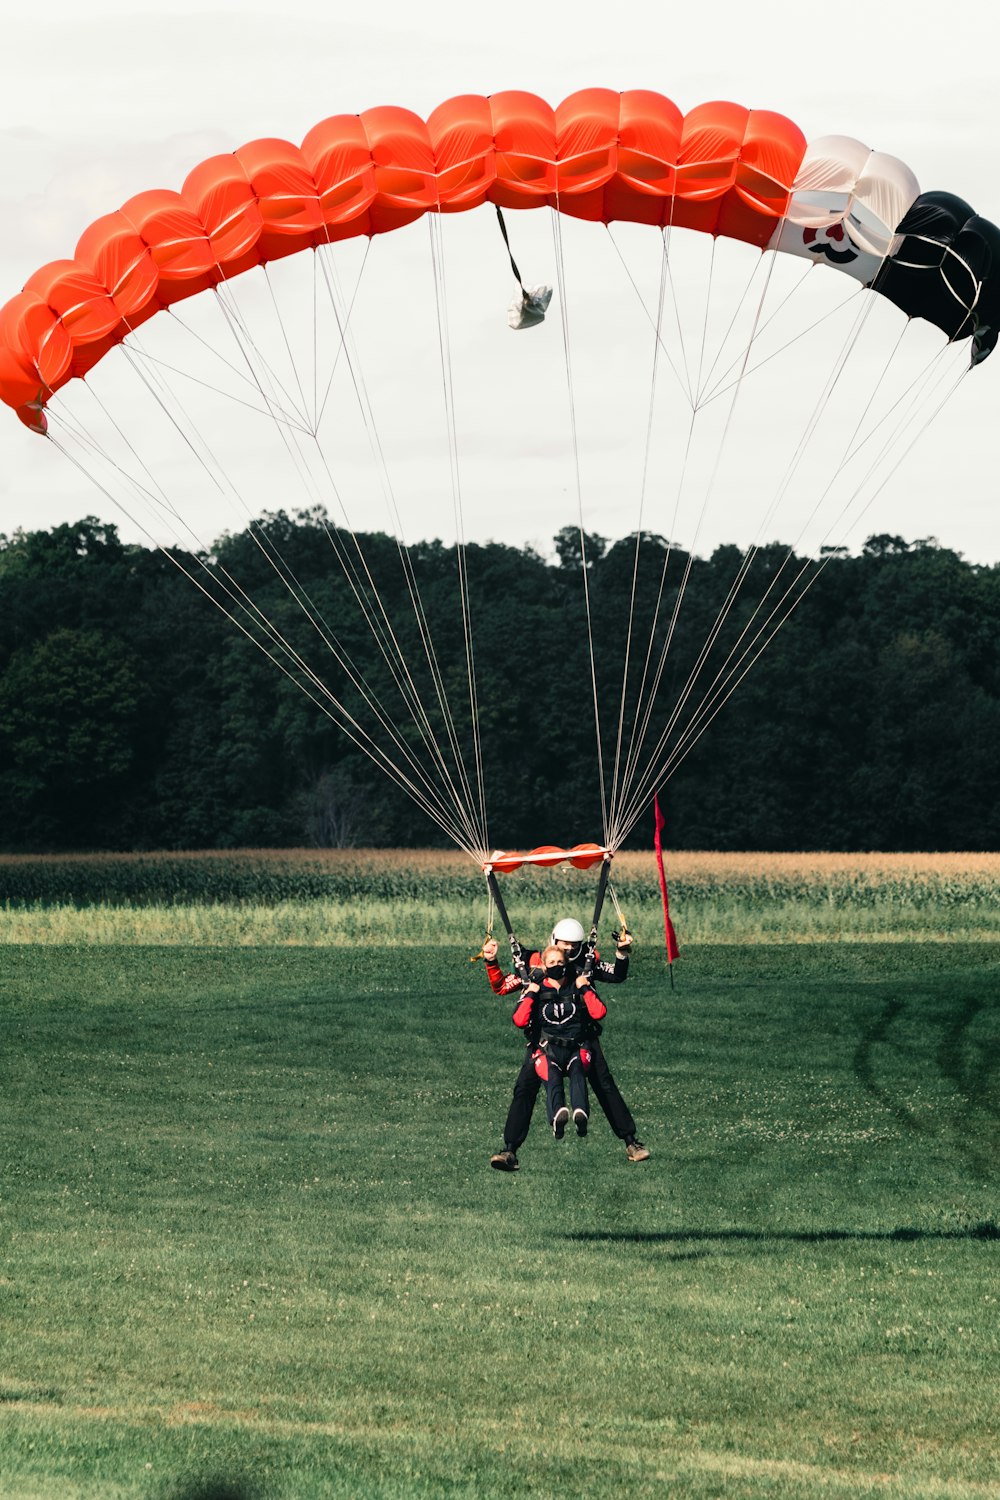 2 men in red and black suit riding on yellow and red parachute